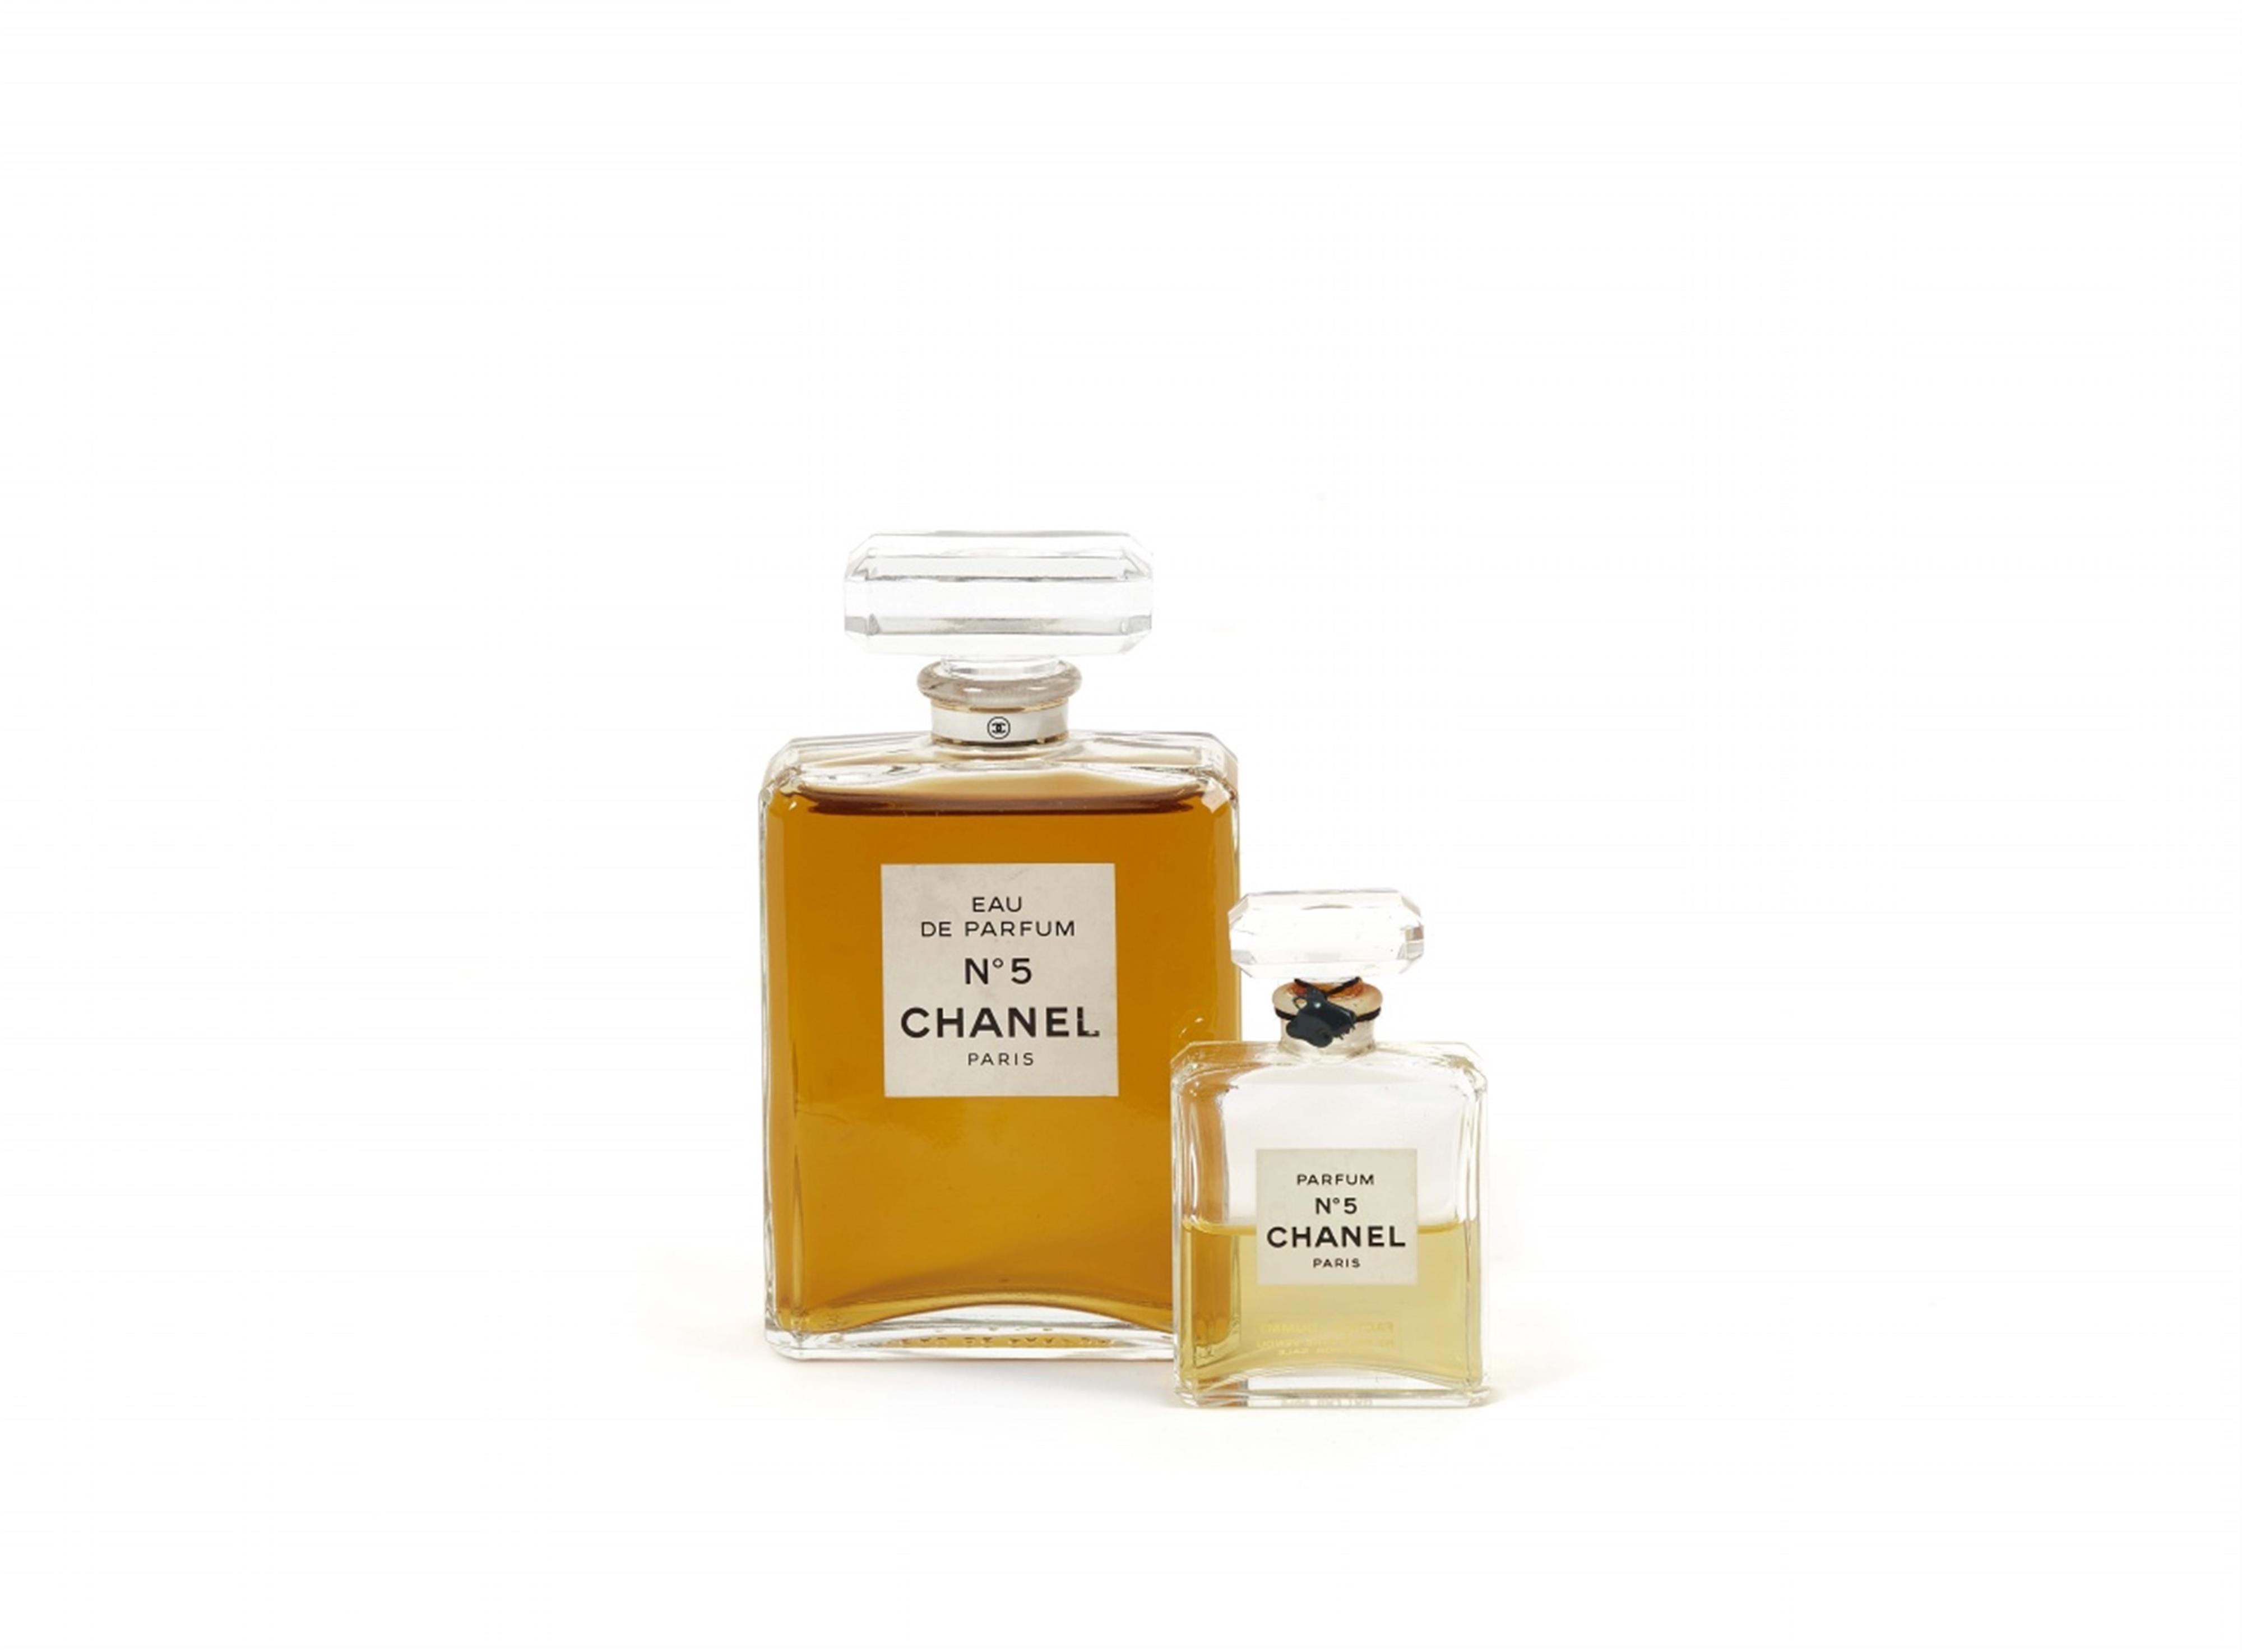 Zwei Factices No 5 Chanel - image-1